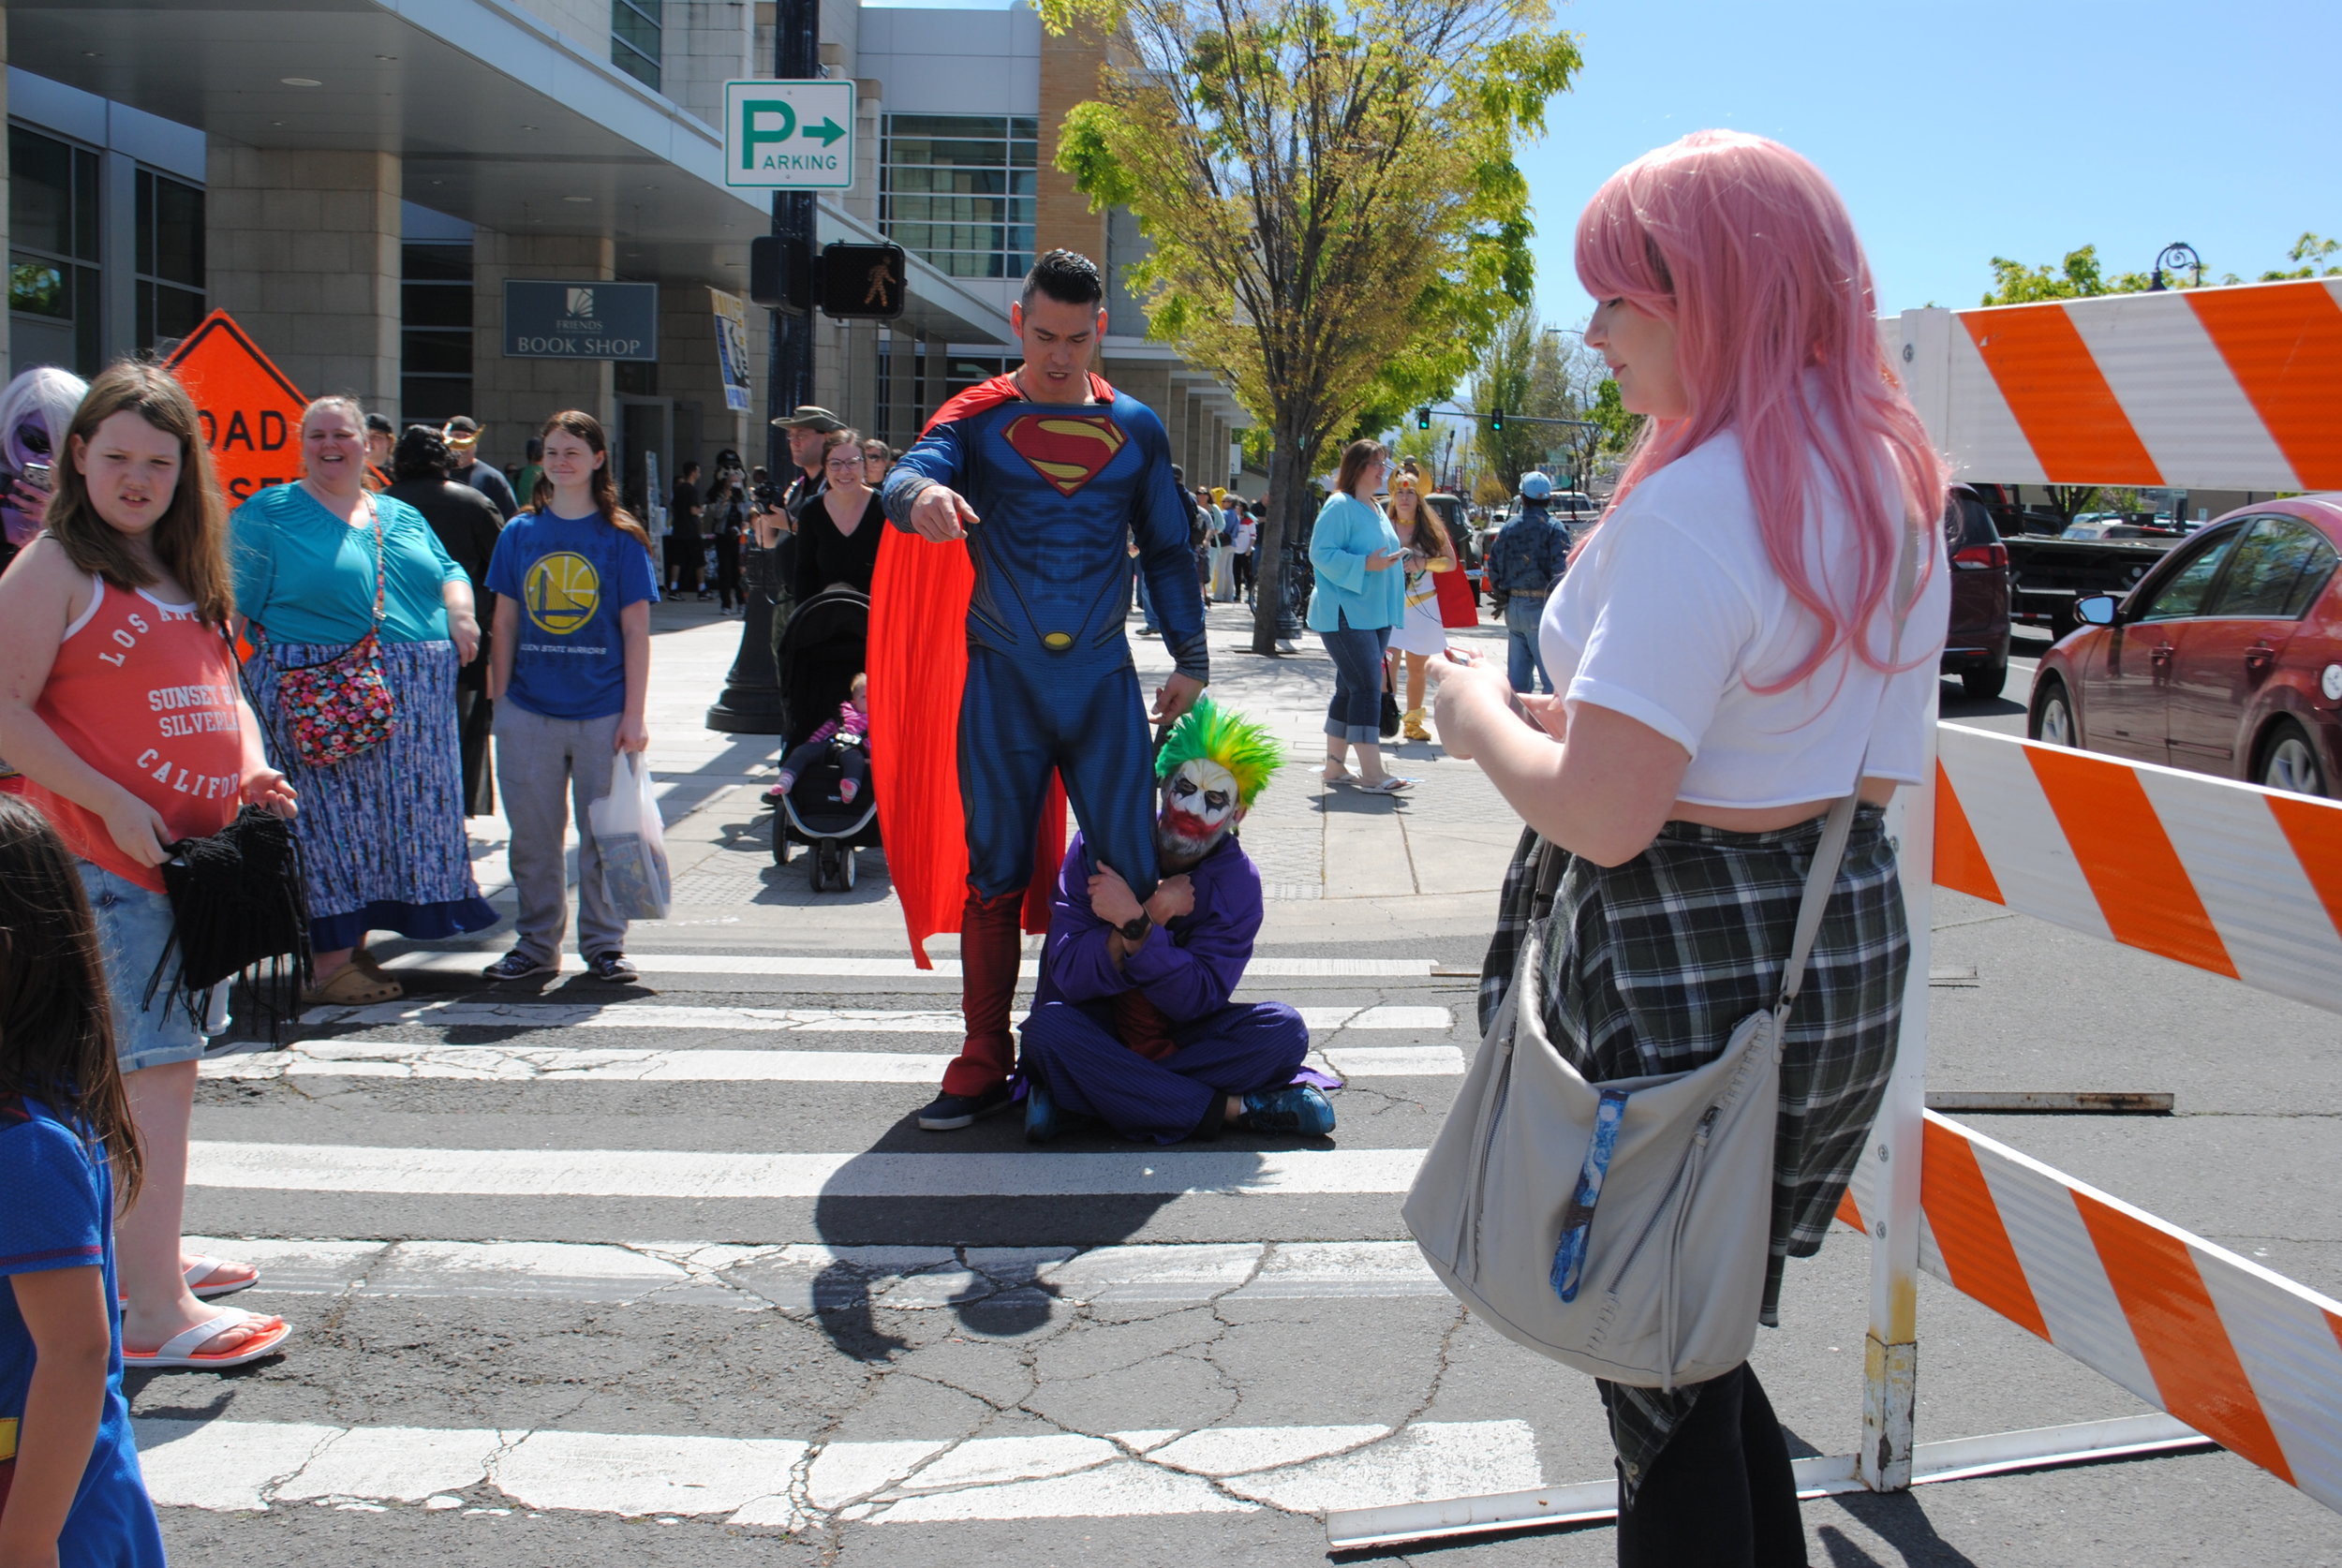 MEDFORD COMIC-CON 2017 - What to do in Southern Oregon - Medford - Jackson County Library Services - Rogue Community College - Friends of the Medford Library